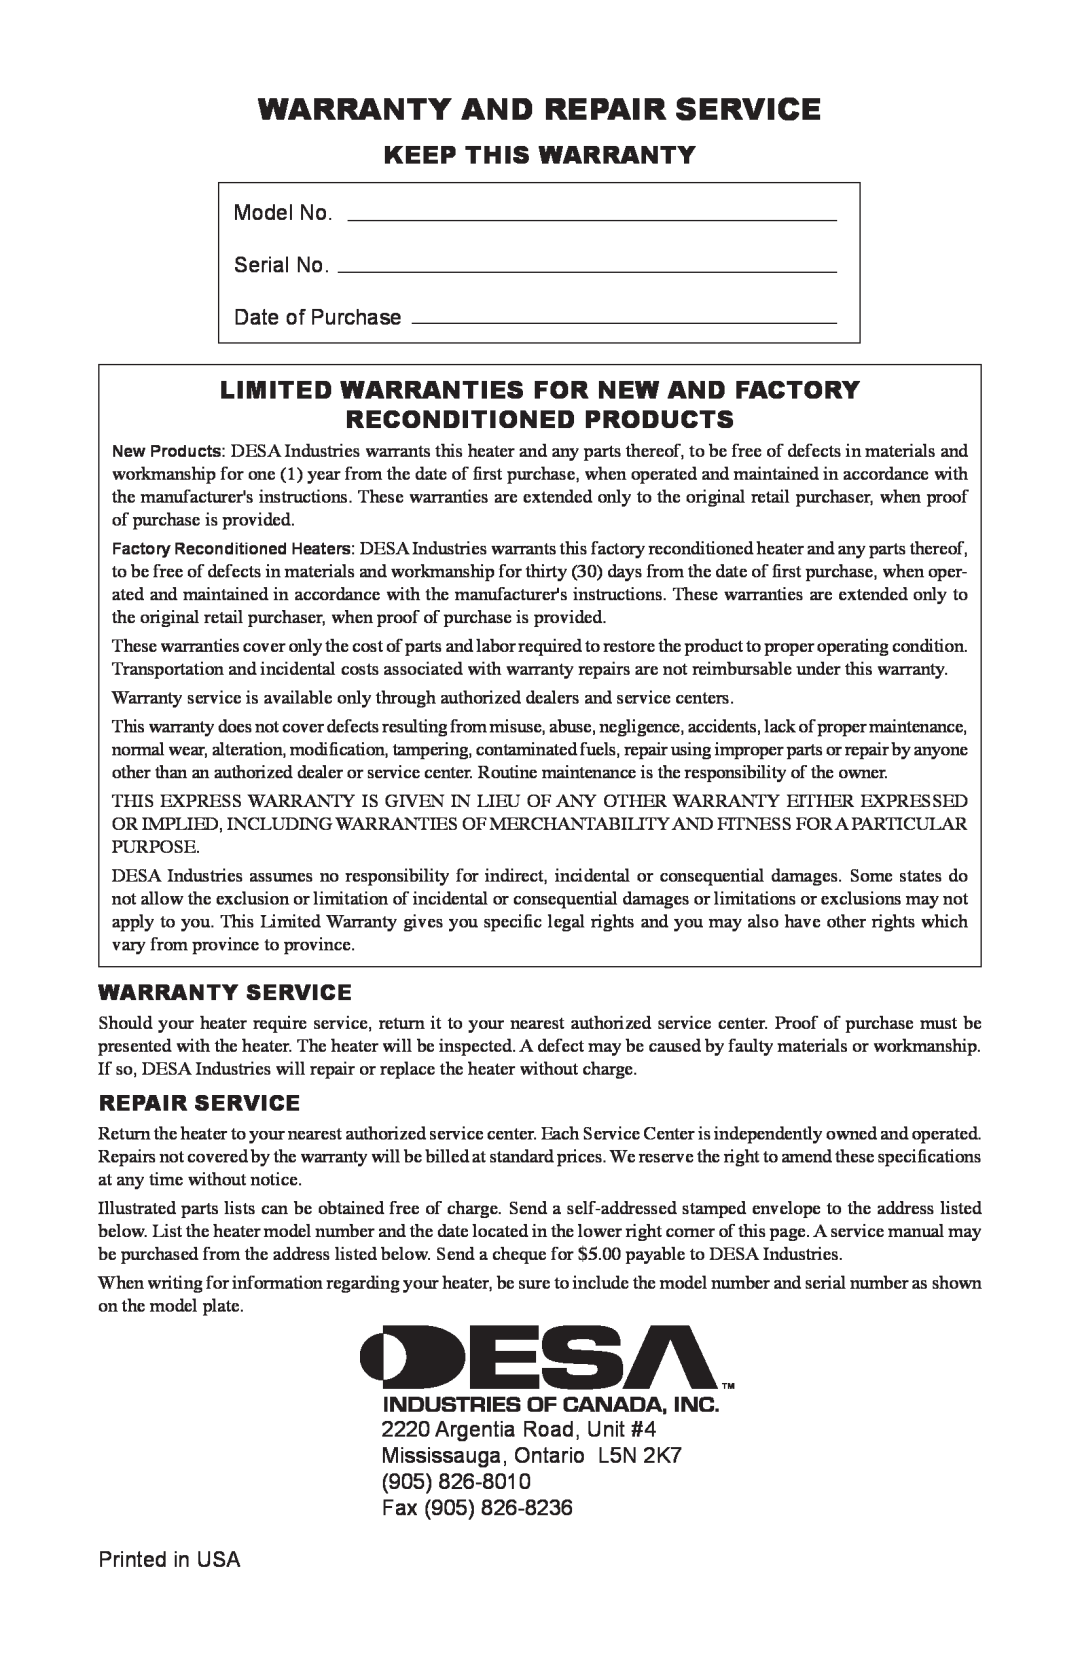 Desa BC165DT Warranty And Repair Service, Keep This Warranty, Limited Warranties For New And Factory, Warranty Service 